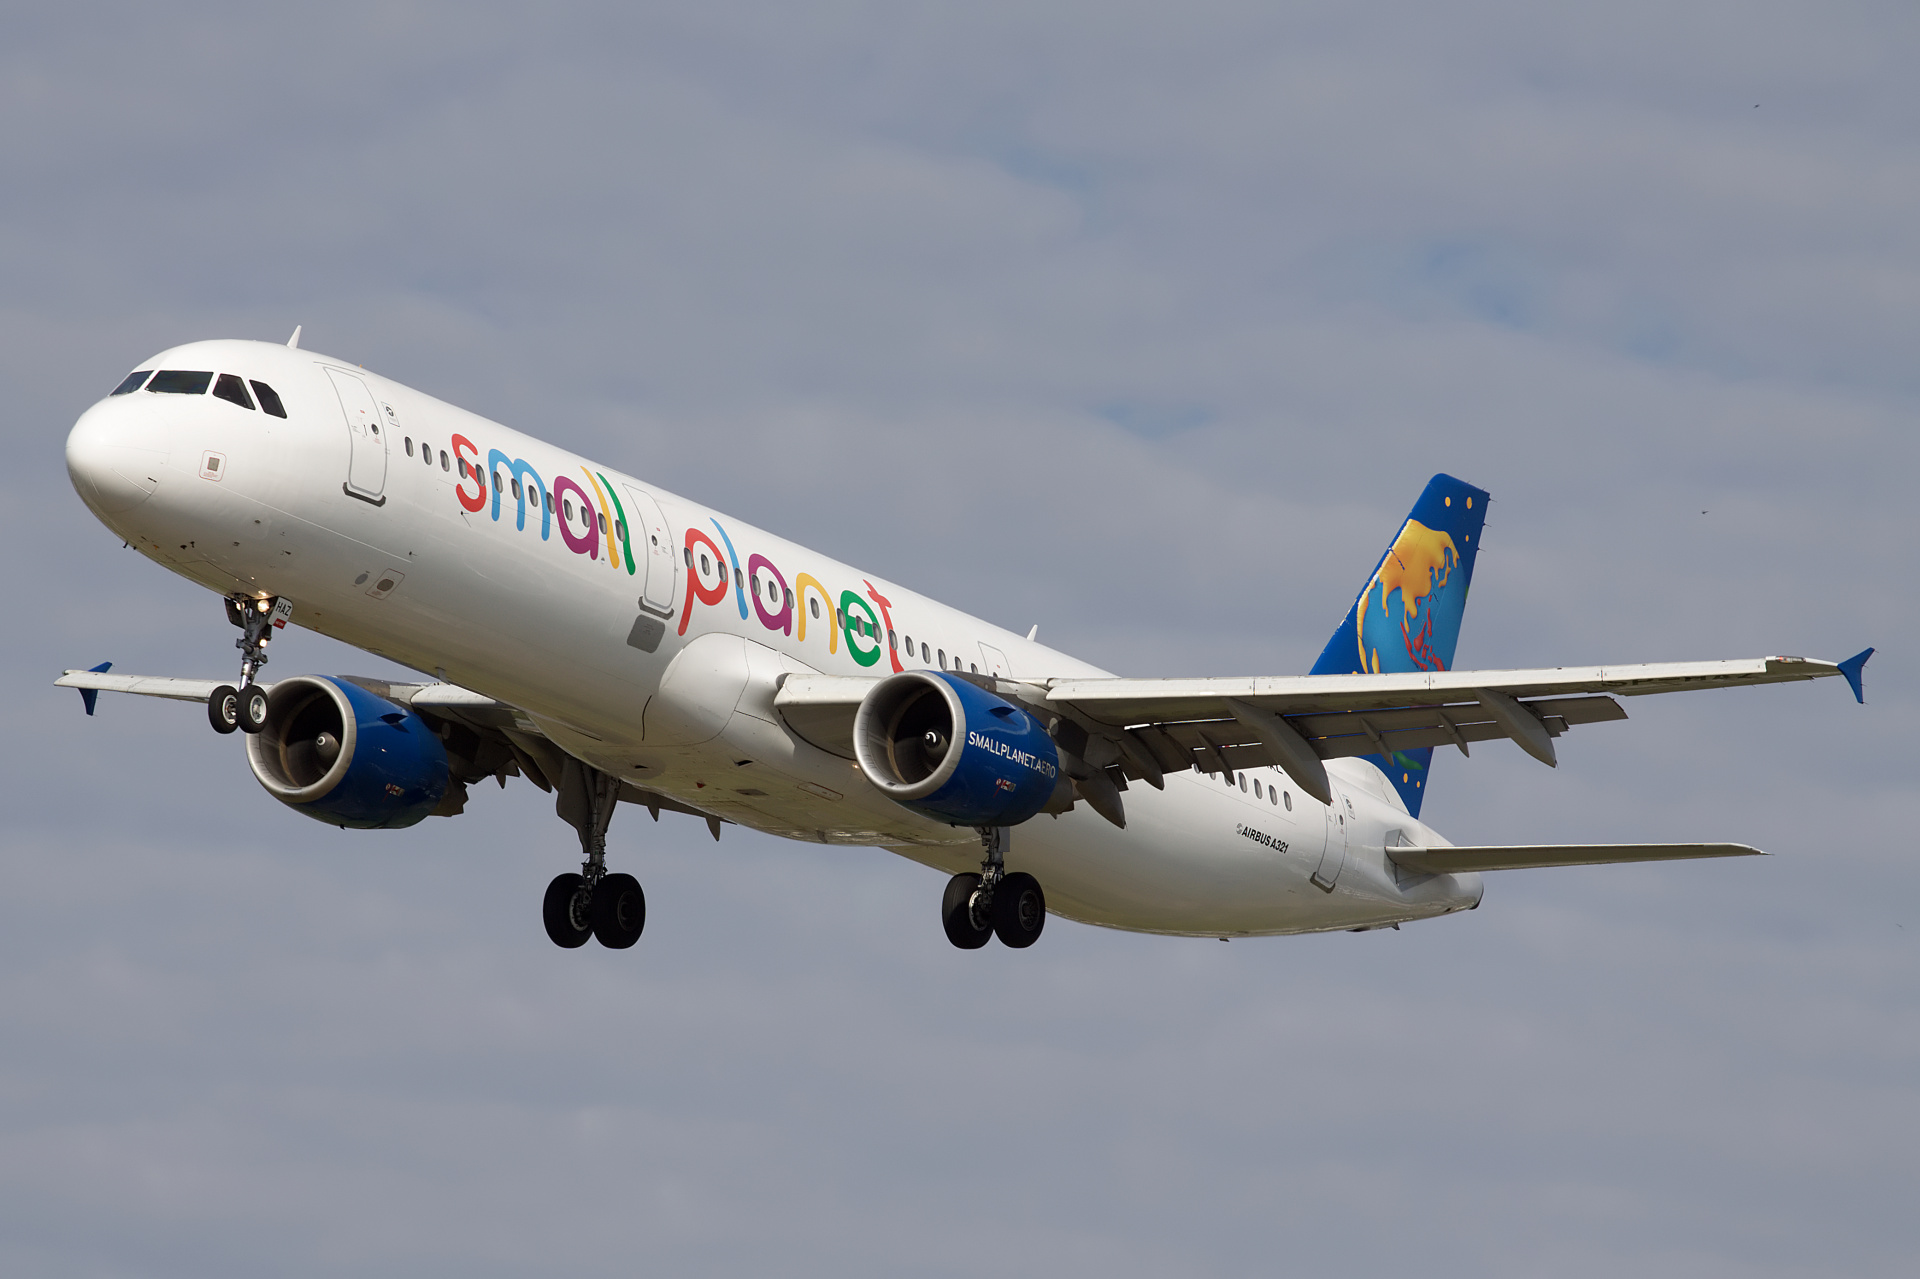 SP-HAZ (Aircraft » EPWA Spotting » Airbus A321-200 » Small Planet Airlines Polska)